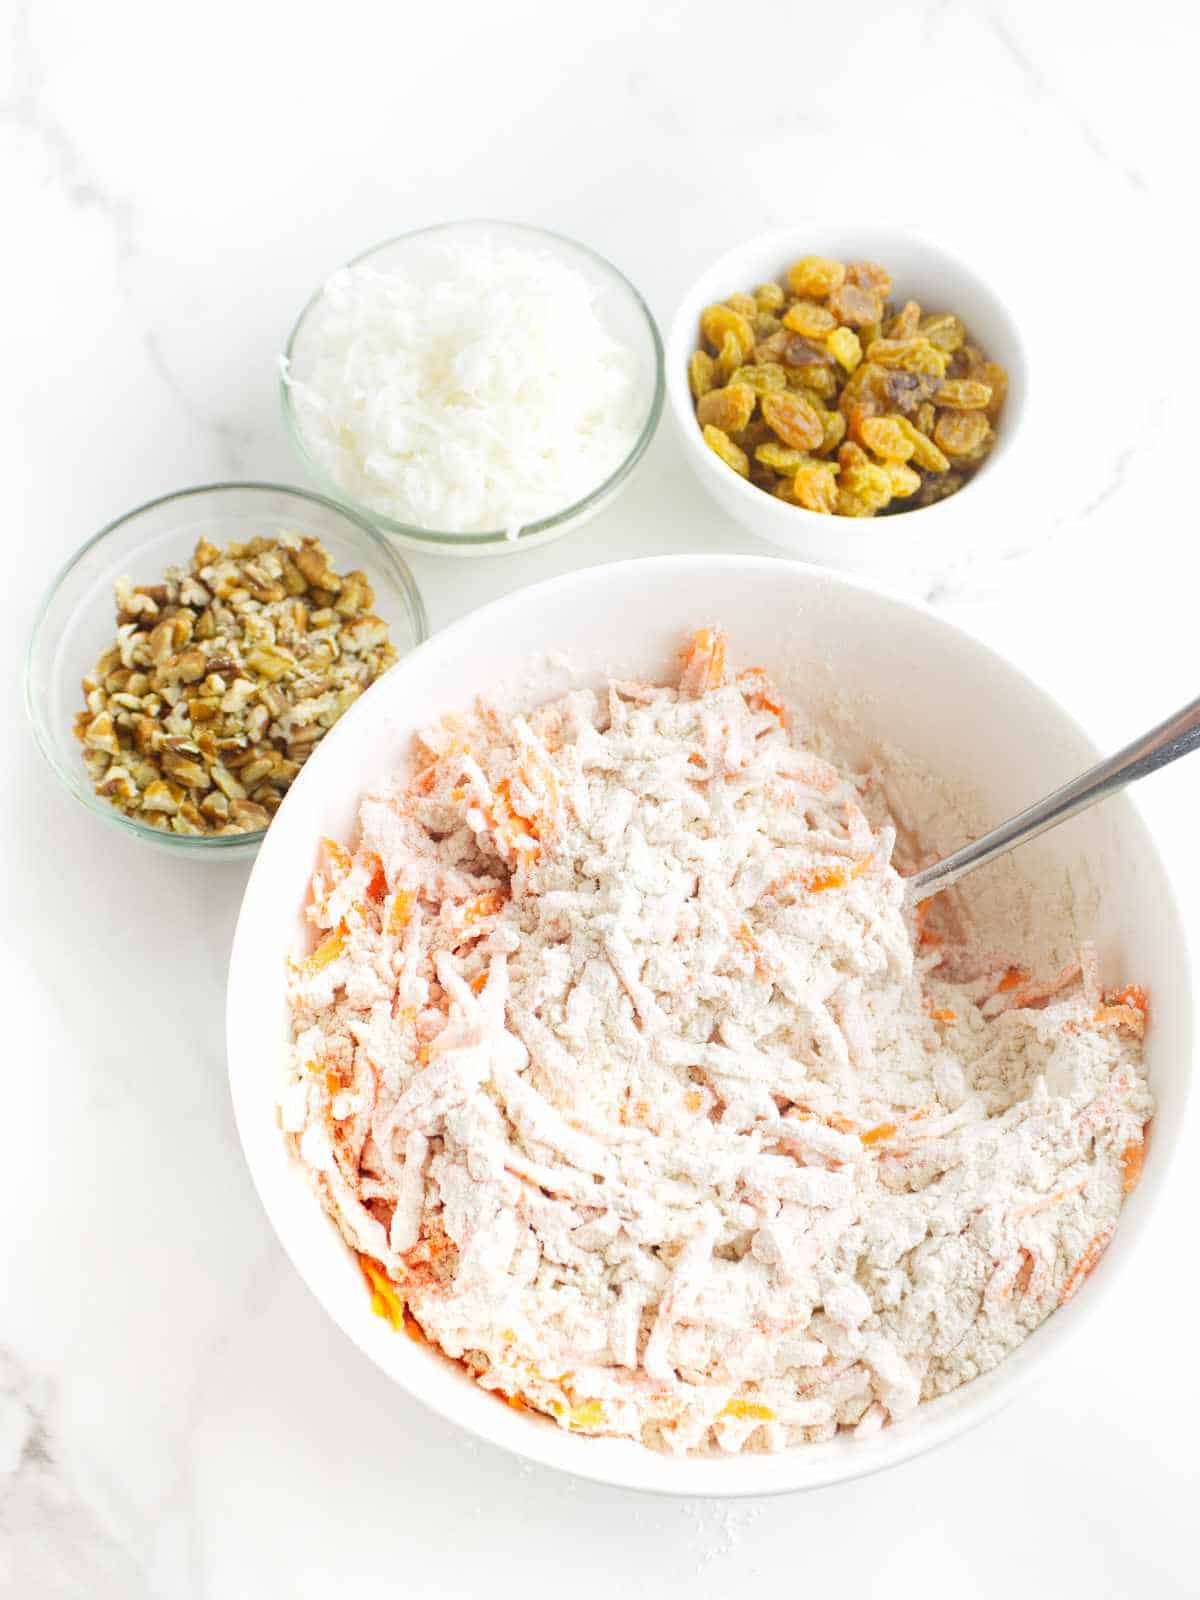 grated carrots coated with flour, and small bowls with raisins, chopped nuts, and shredded coconut nearby.